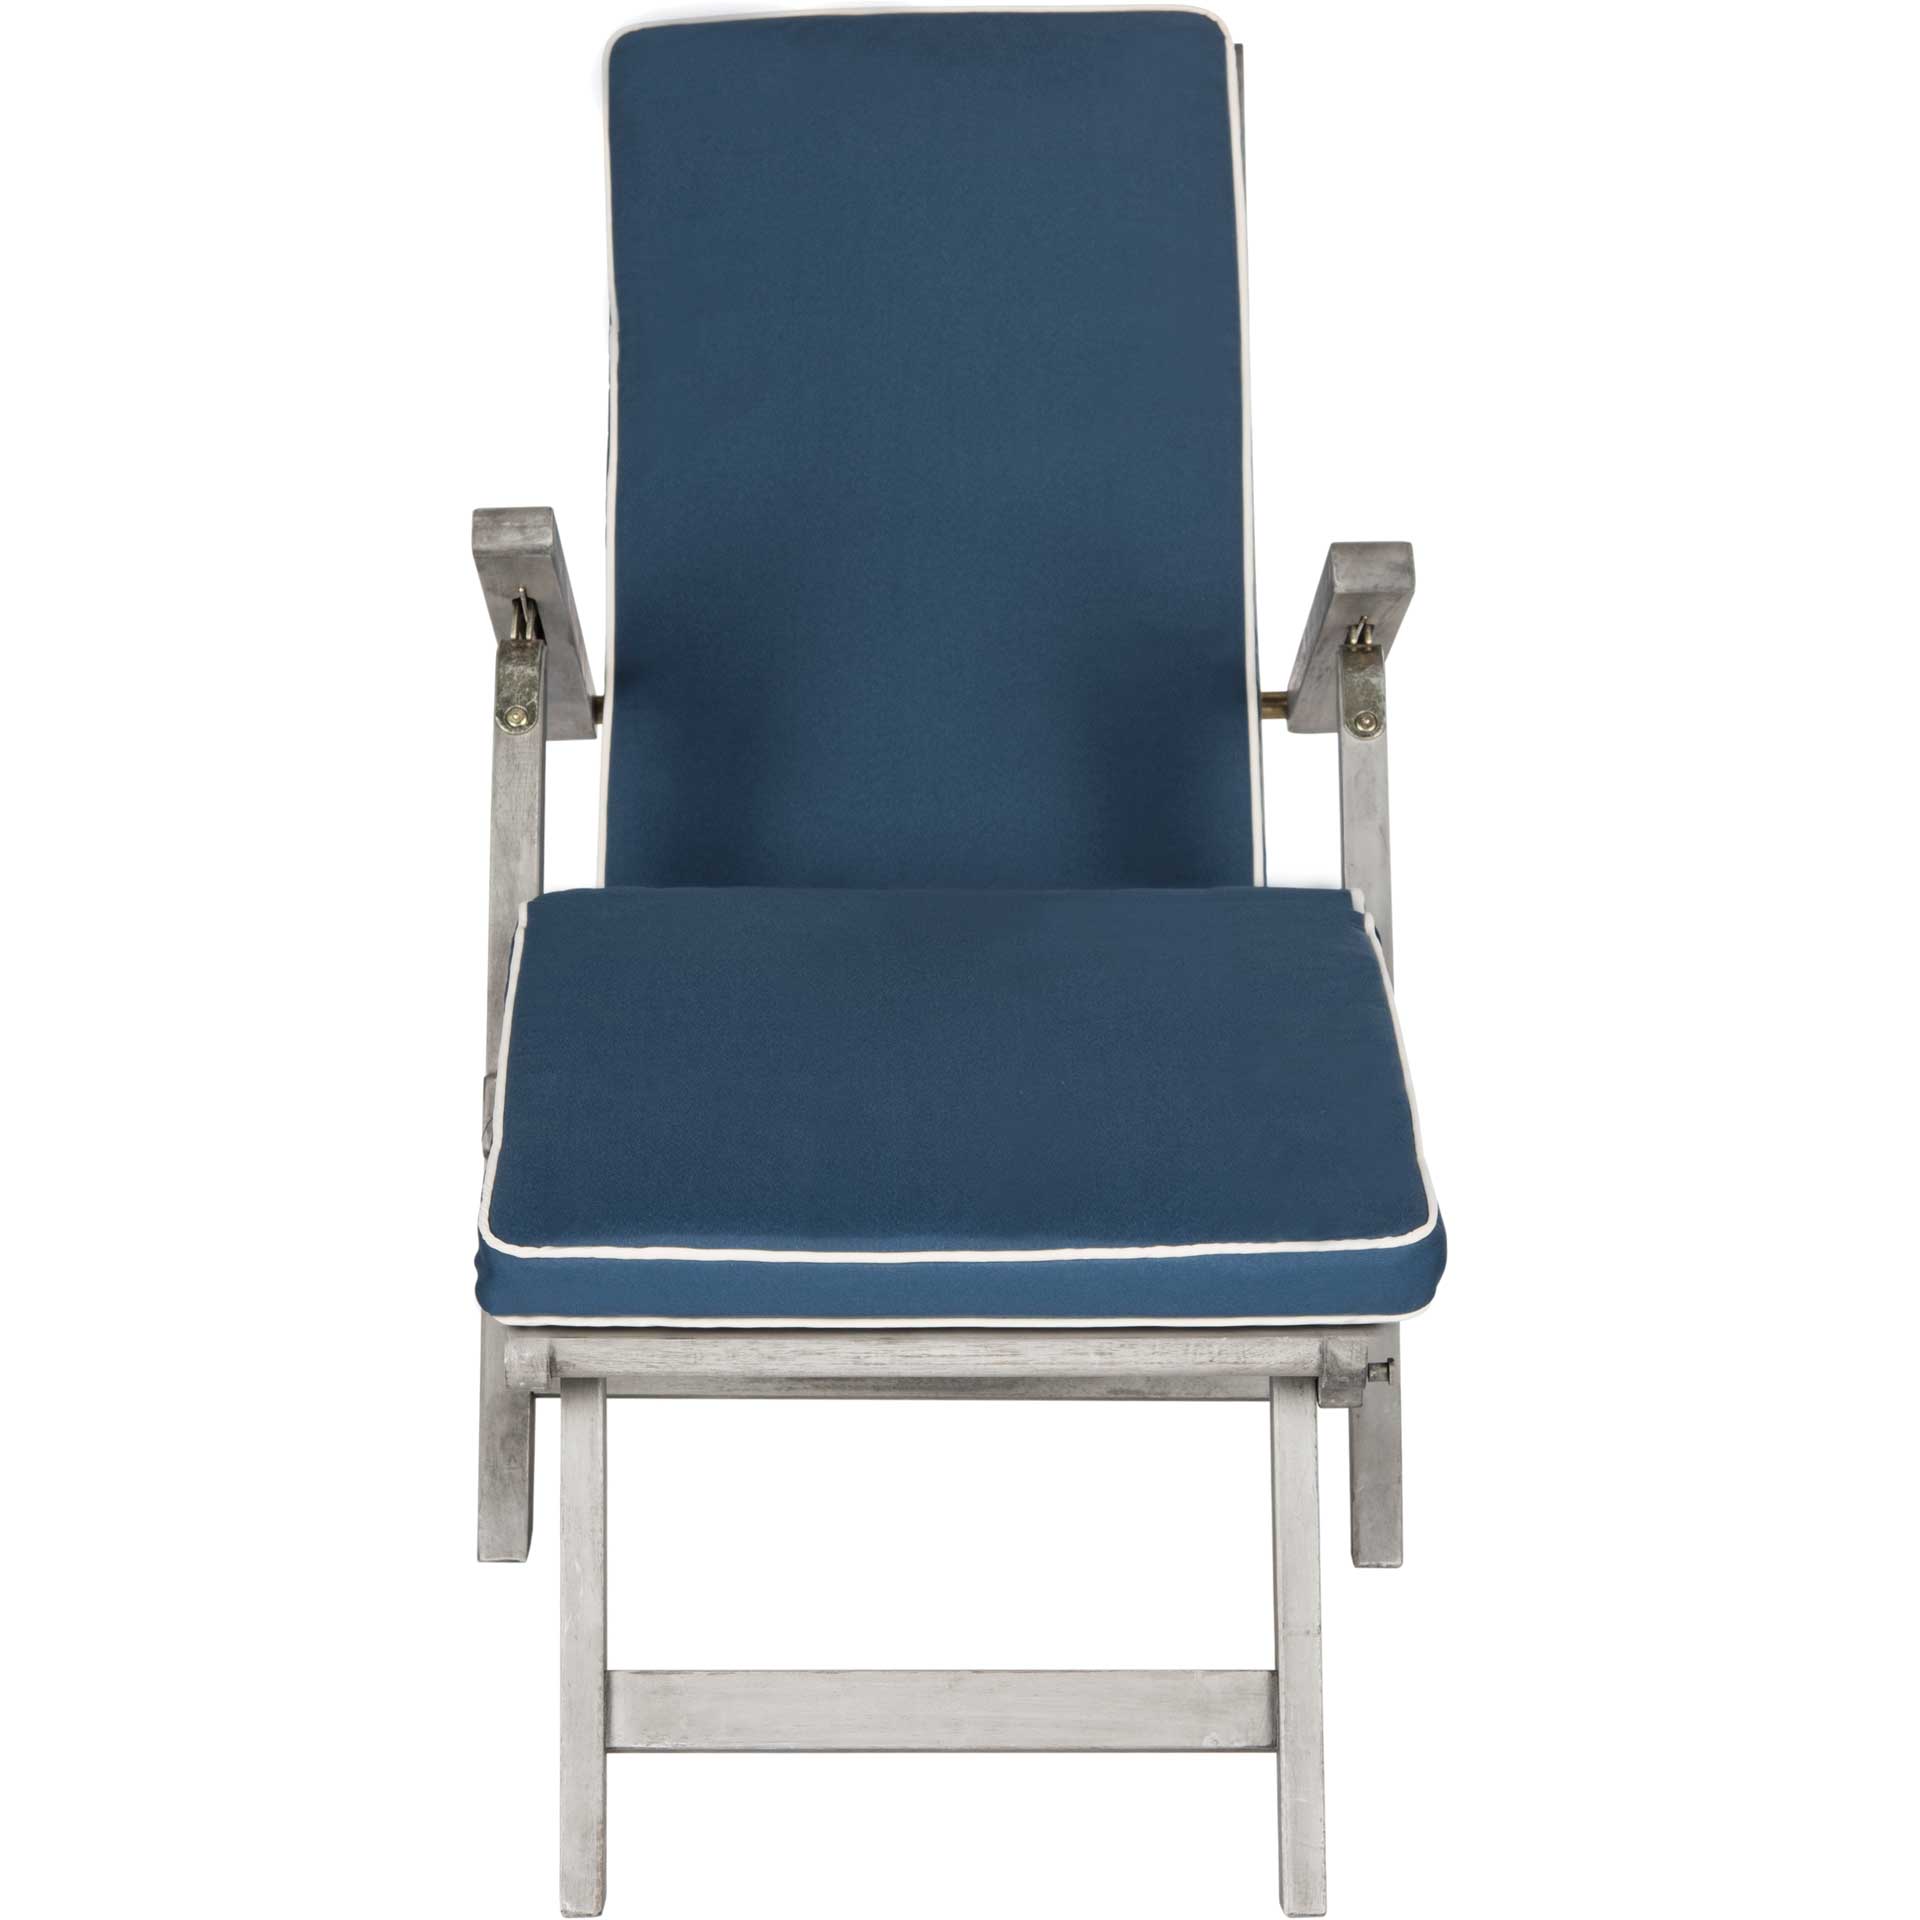 Palm Lounge Chair Gray/Navy